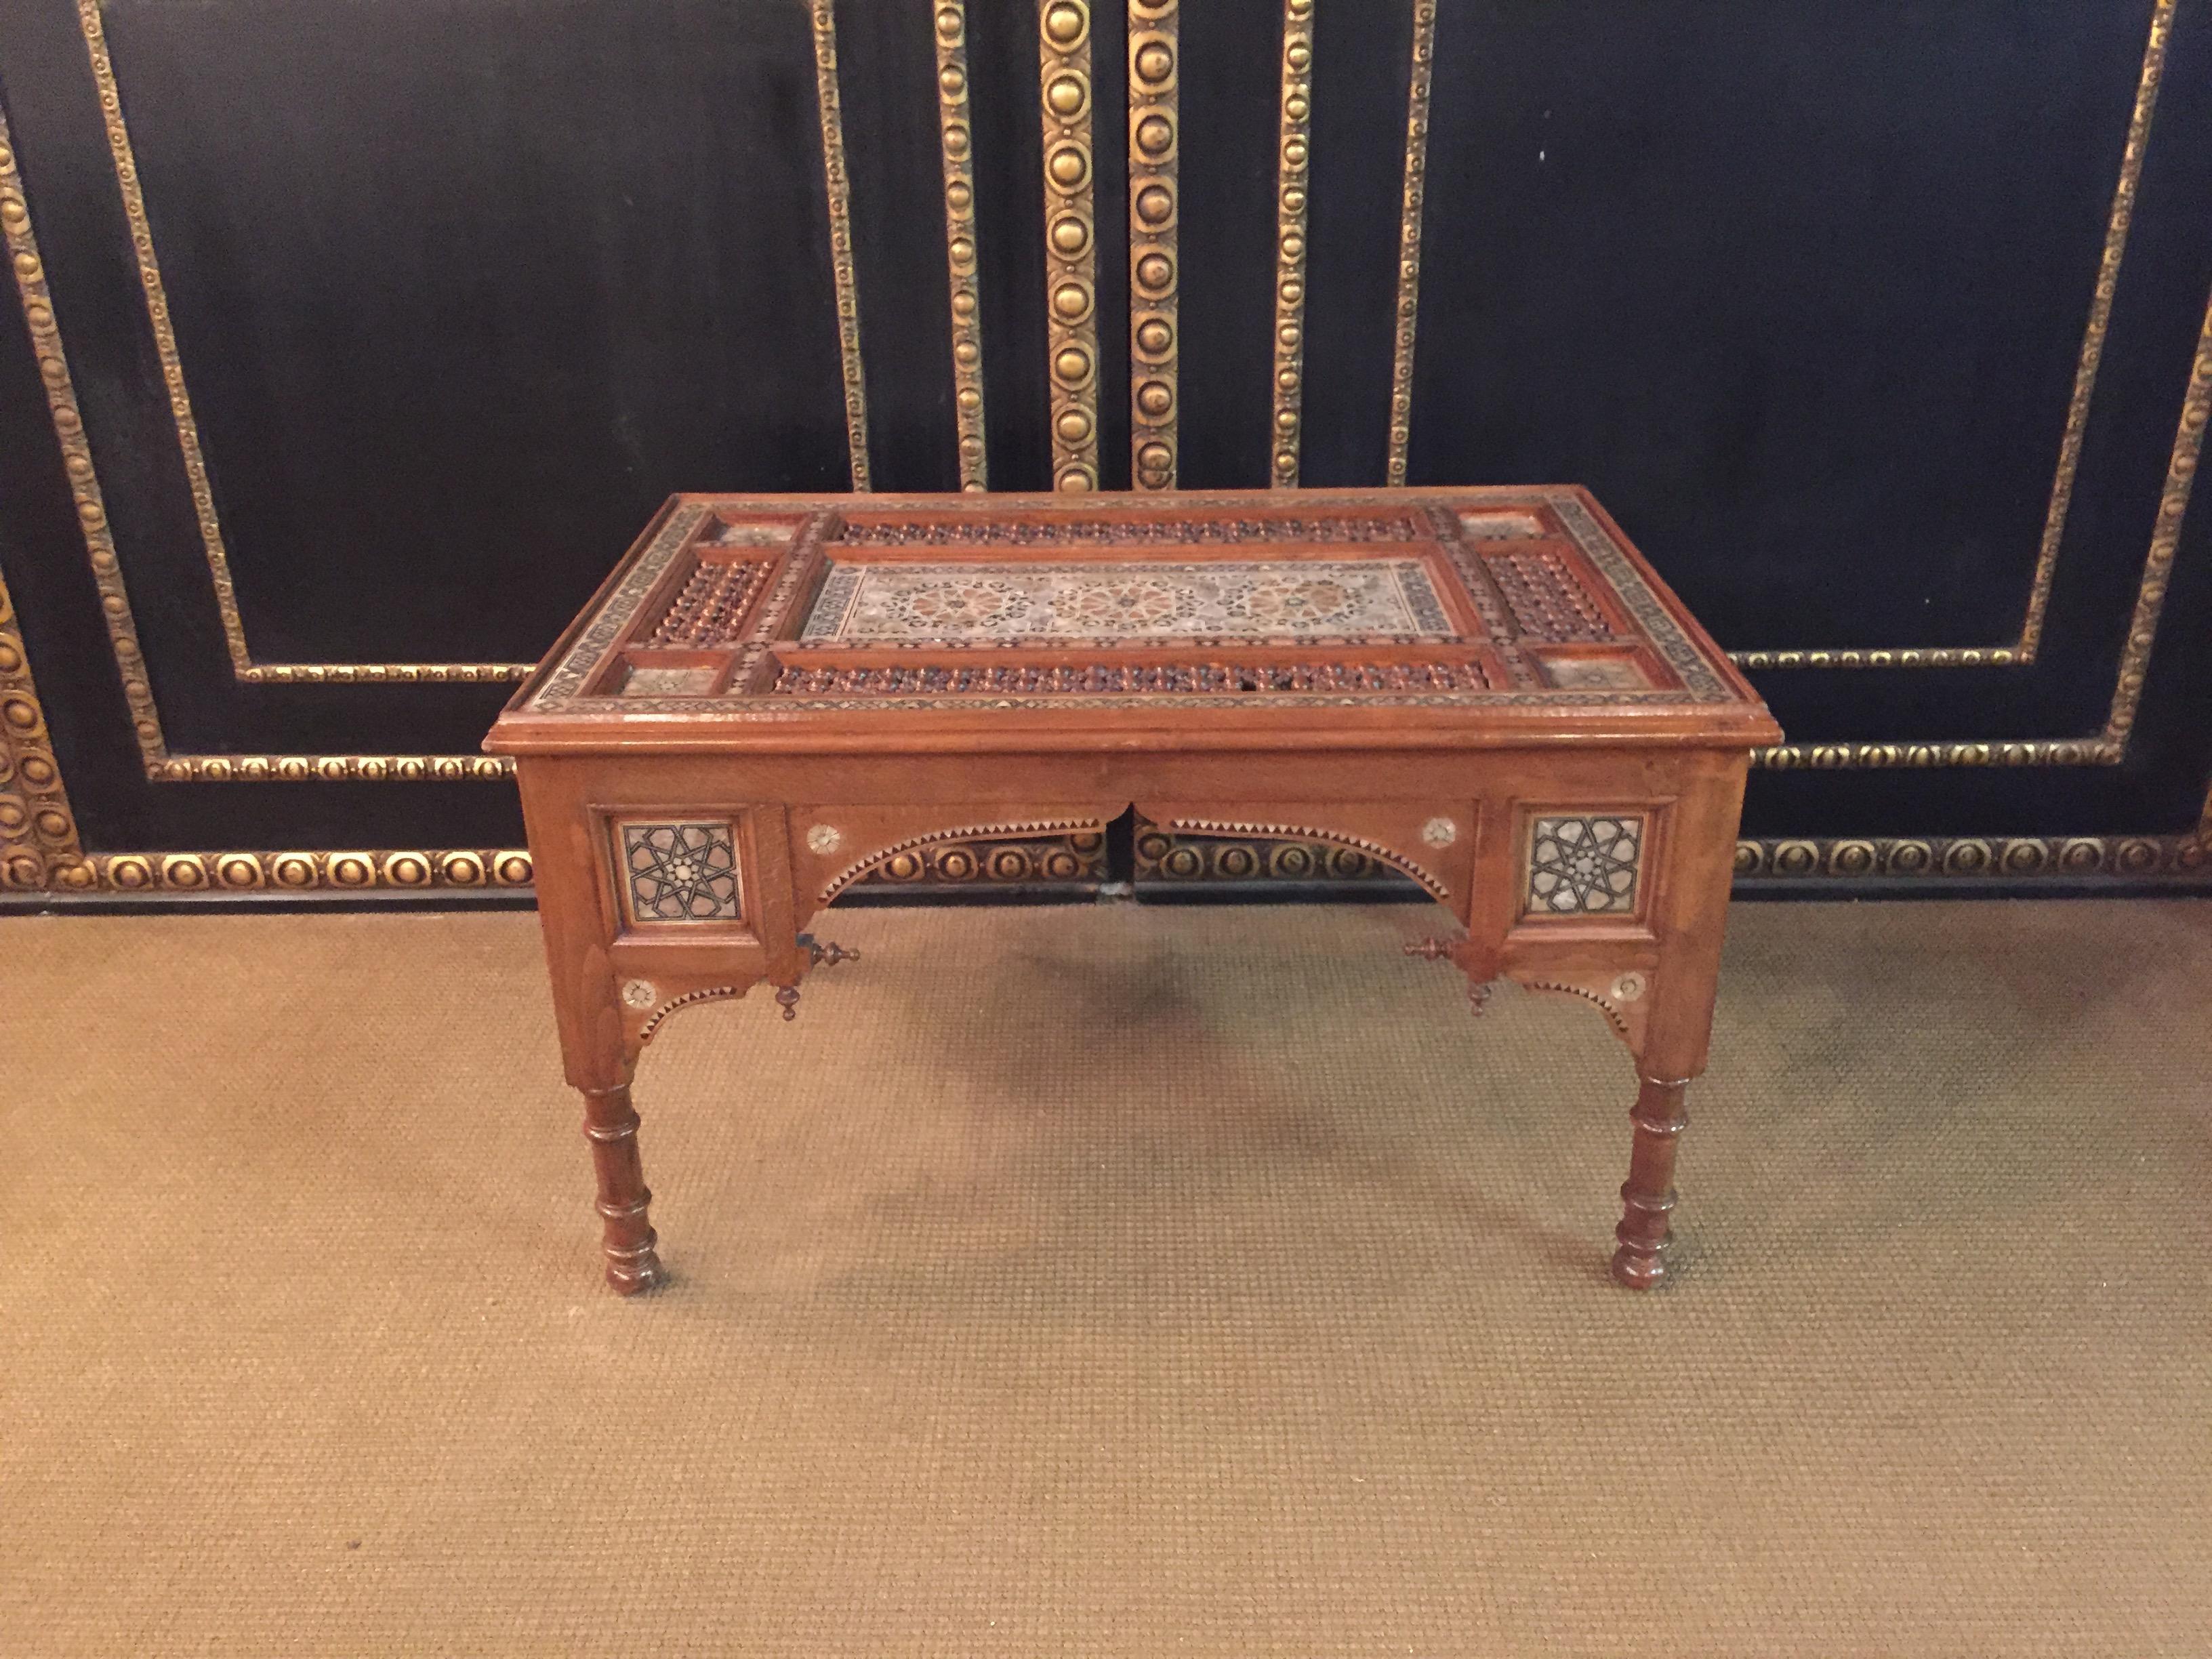 Very nice coffee table with the finest inlaid workmen and carvings
Oriental style,
circa 1920.